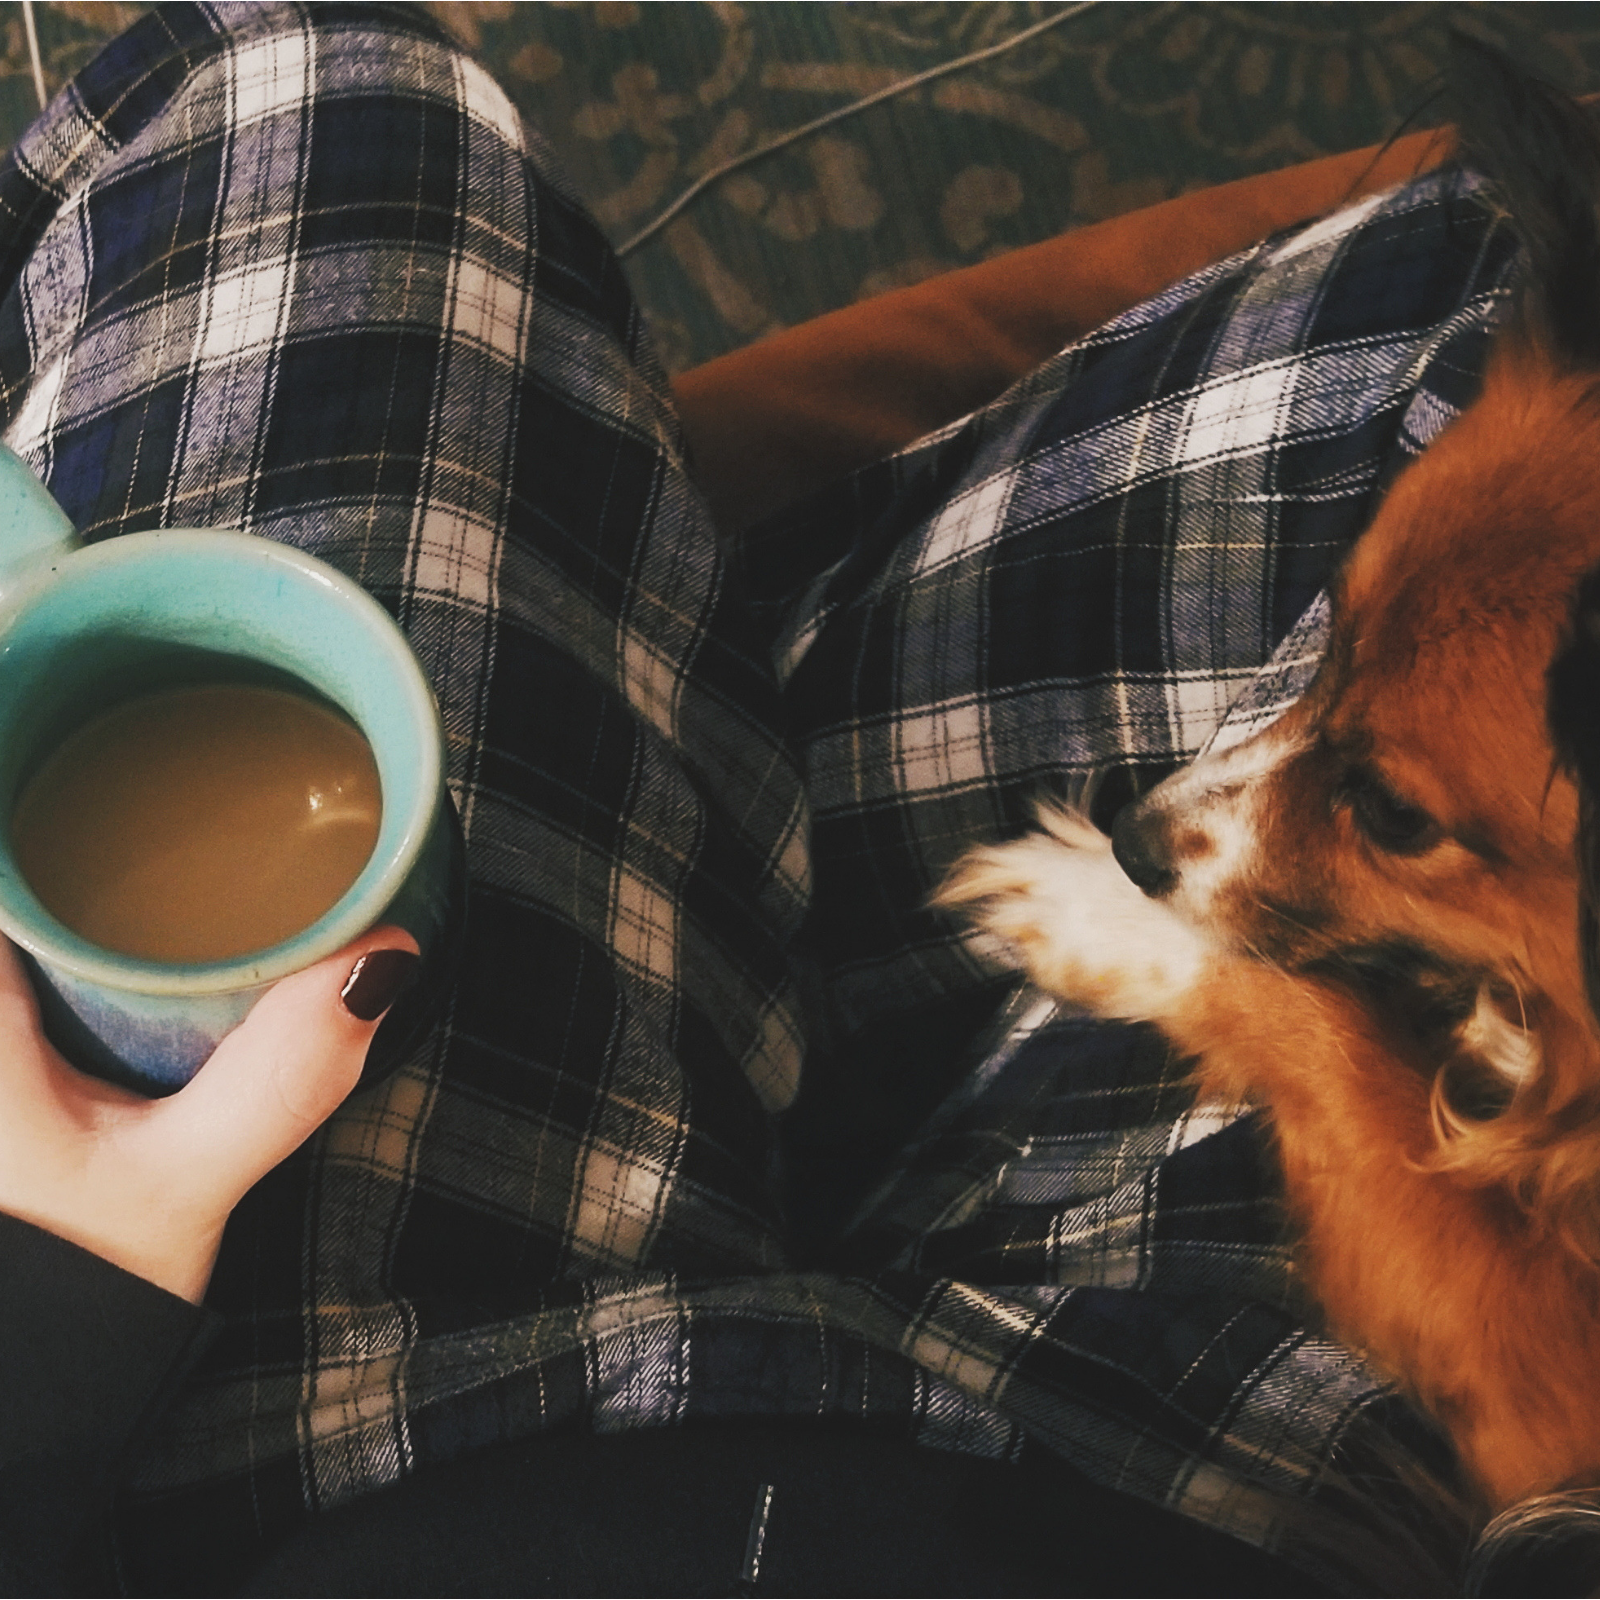 A down shot of a girl in pj pants holding a cup of coffee with a dog in her lap and a devotional book to her left while sitting on a couch